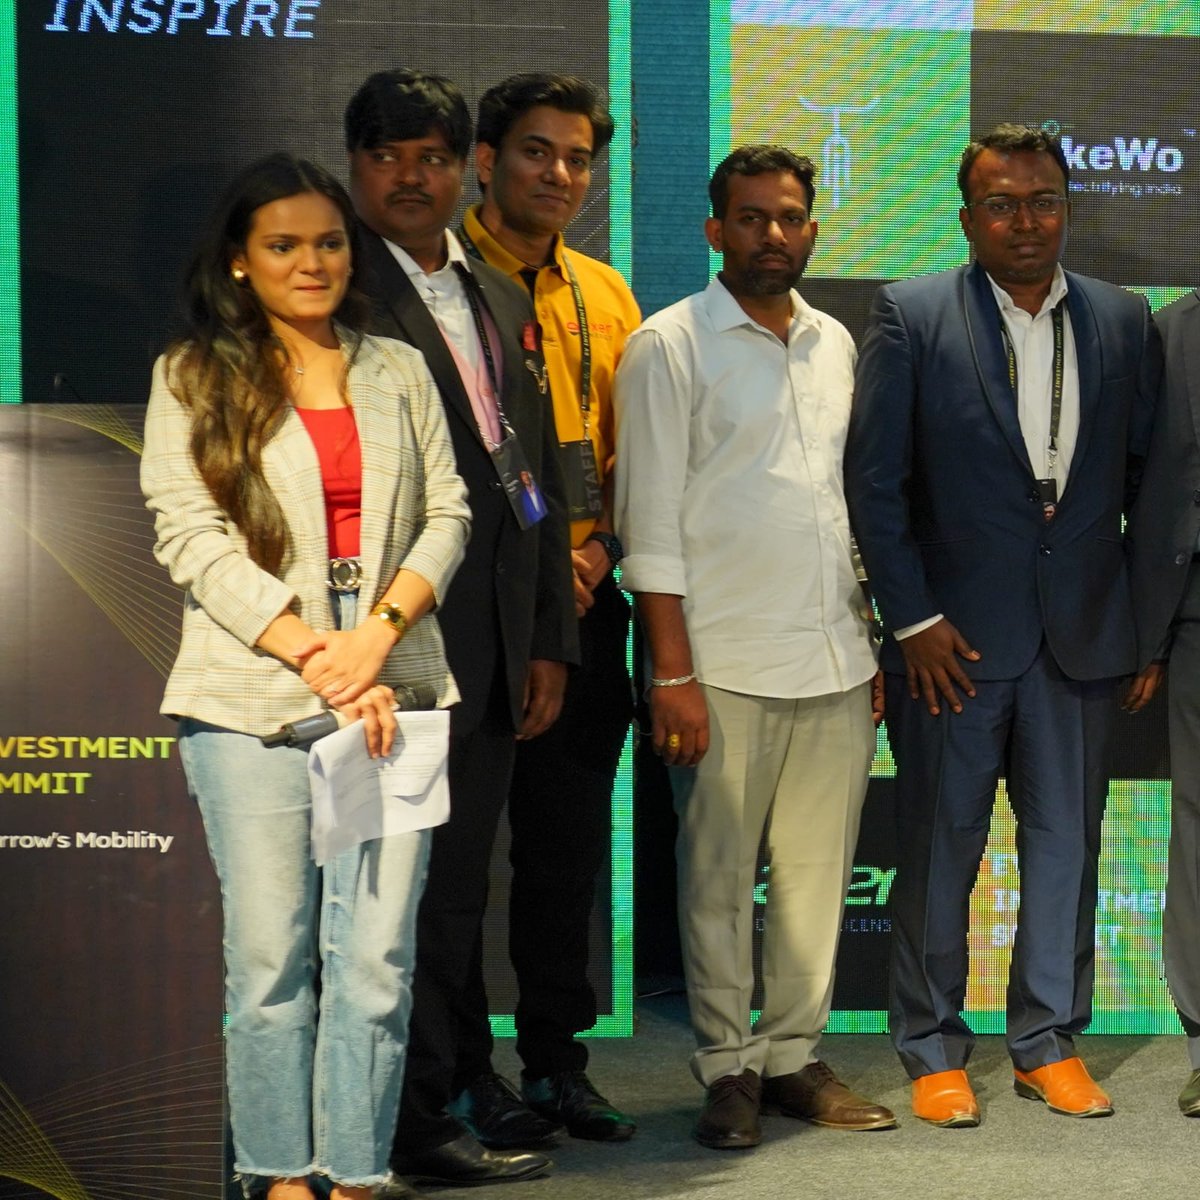 Team EVIS is a testimony of 10 Brands partnering and sharing the vision of moving the entire industry towards a greener future
#sustainabletransport #investmentopportunities #investmentadvice #futureofmobility #hyderabadevent #industryleaders #startups #networking #smbi